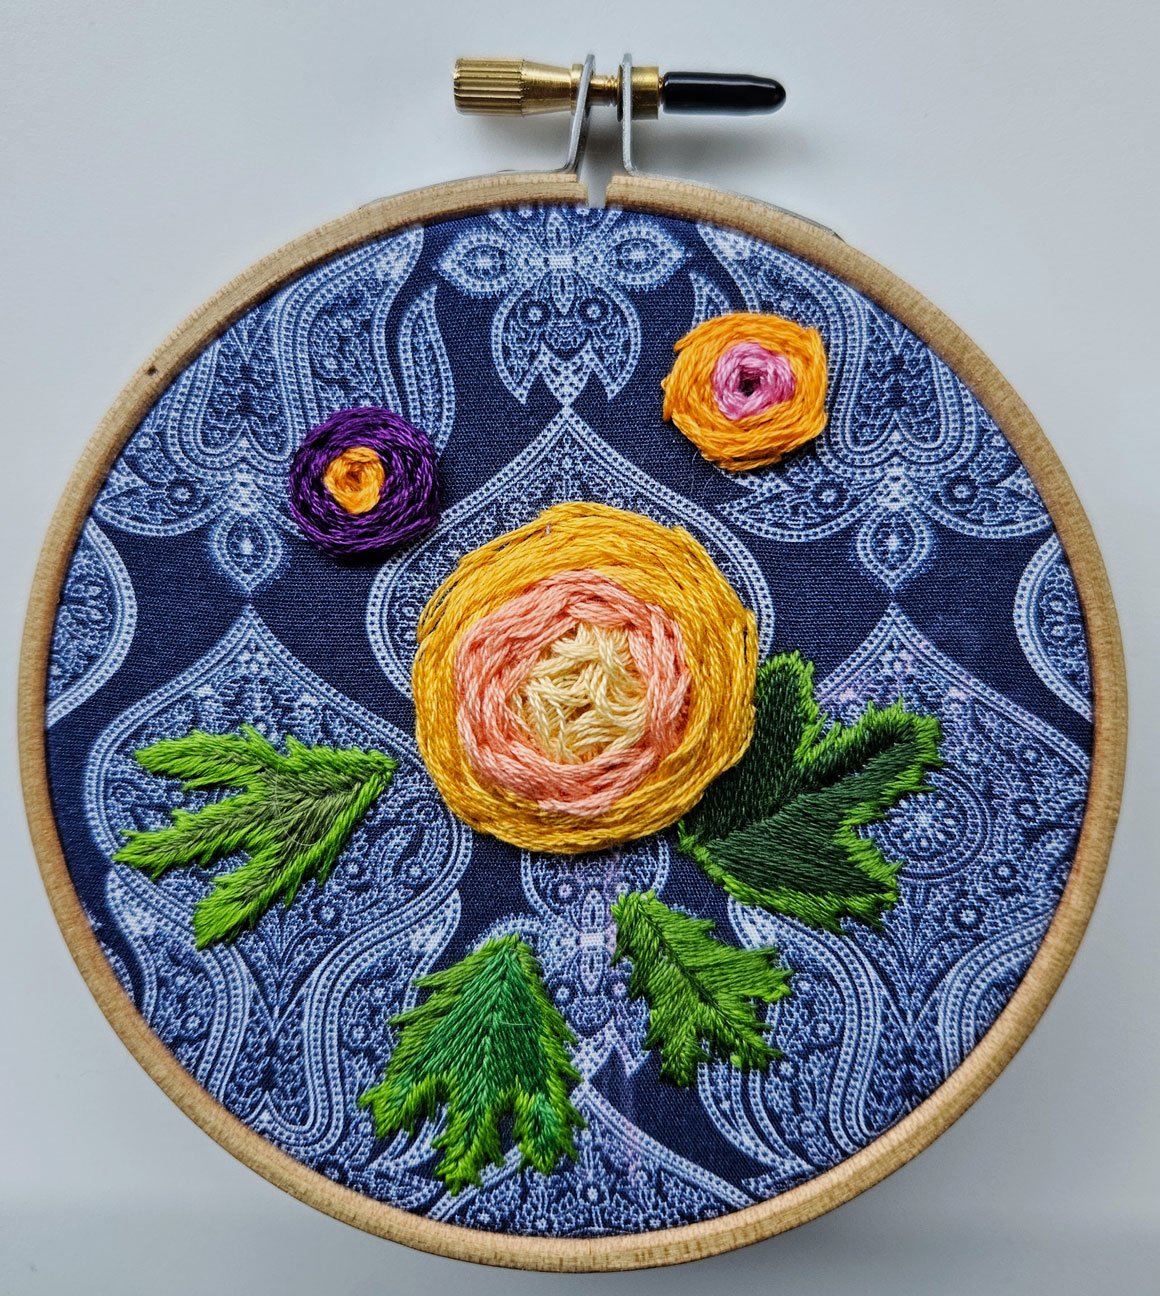   Stitched by Toby S / Surface embroidery  